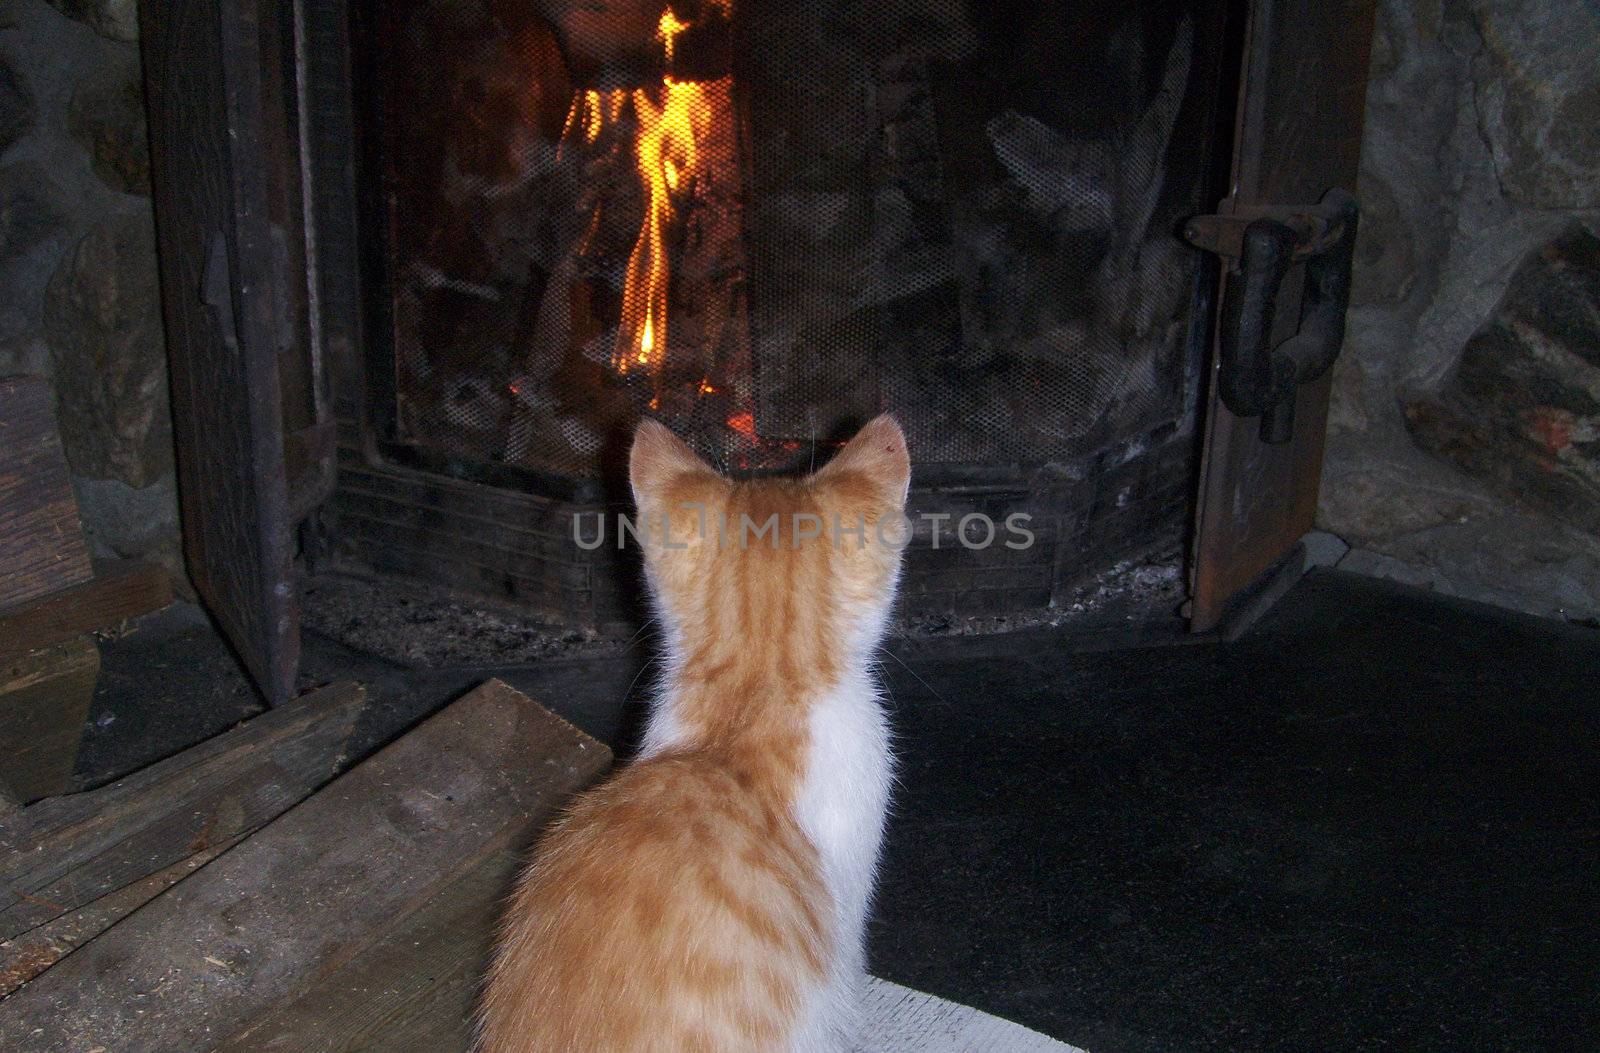 Kitten sitting in front of a fireplace